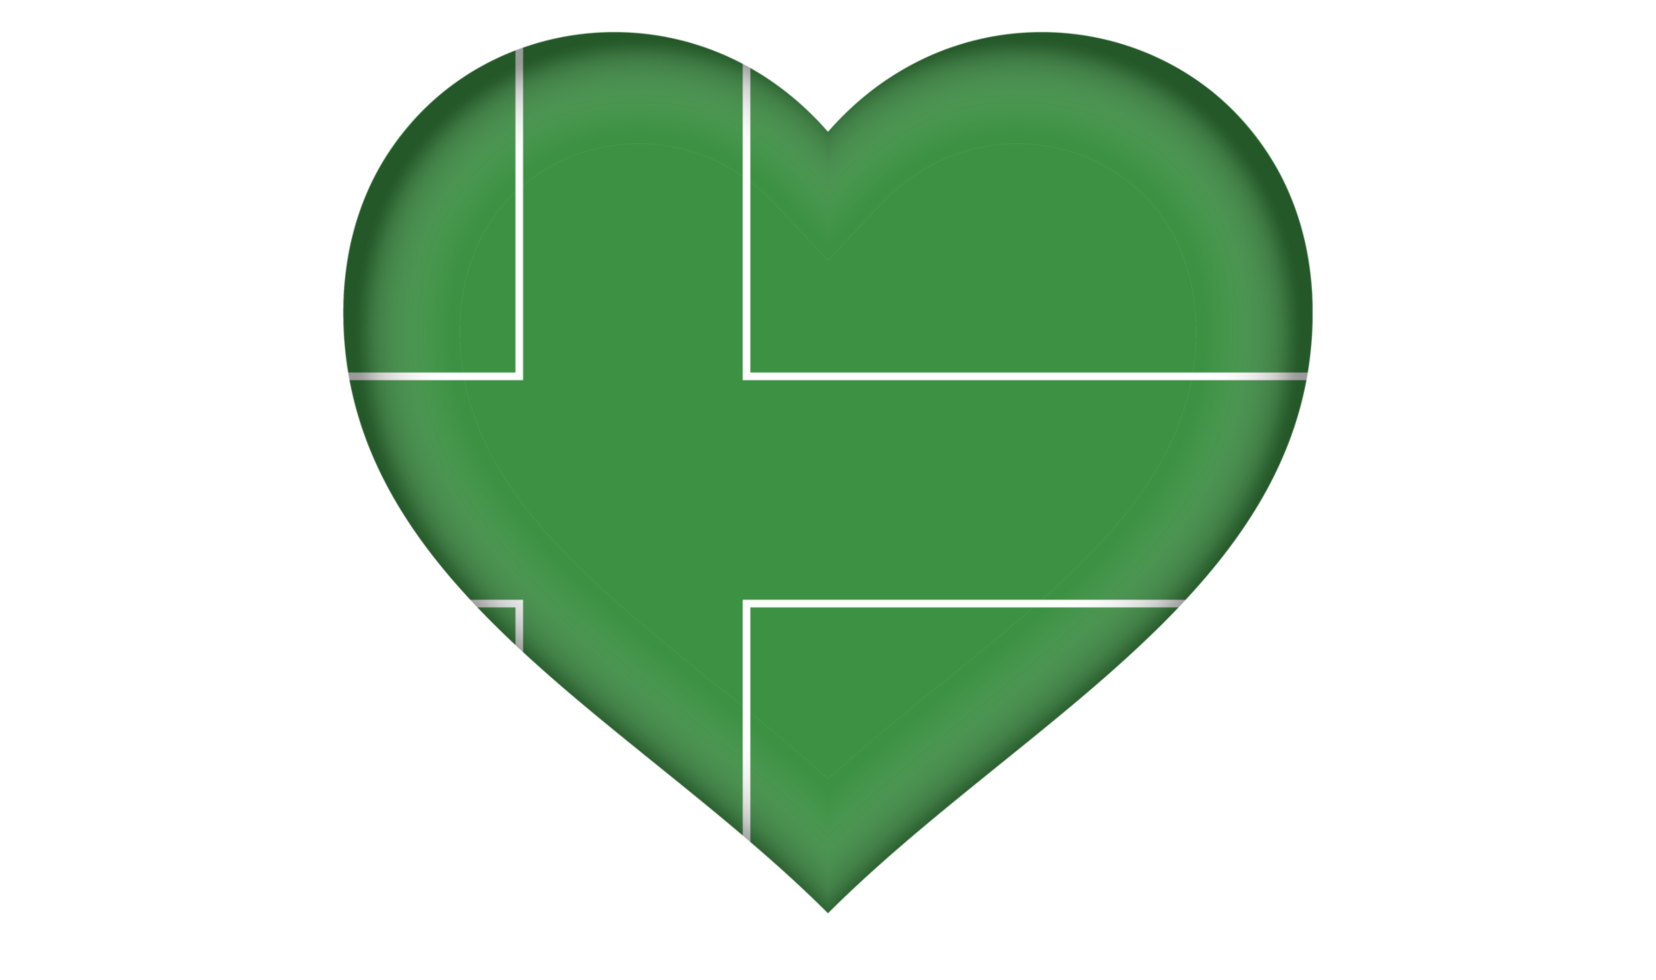 Ladonia flag icon in the form of a heart png